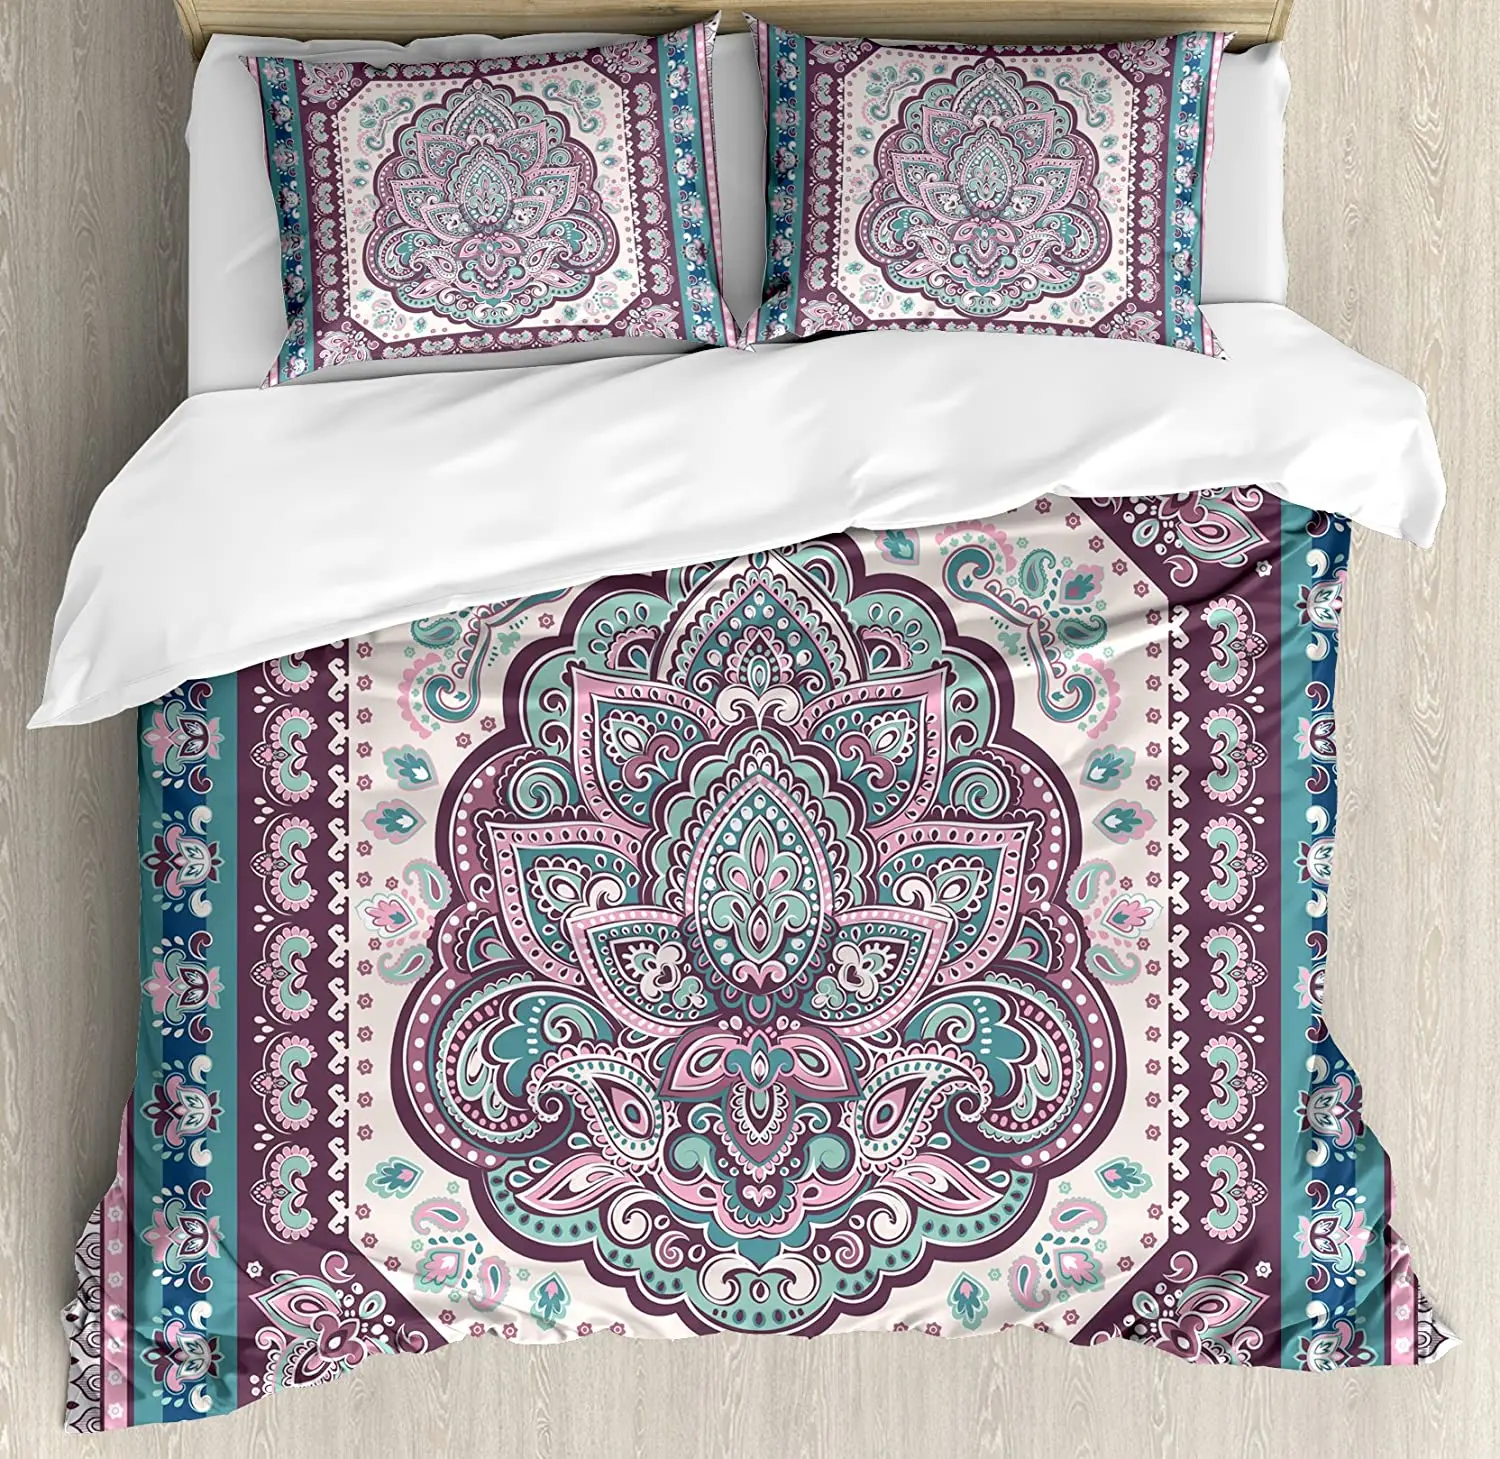 

Ethnic Bedding Set For Bedroom Bed Home Bohemian Hippie Mandala Arabic Paisley Oriental A Duvet Cover Quilt Cover And Pillowcase